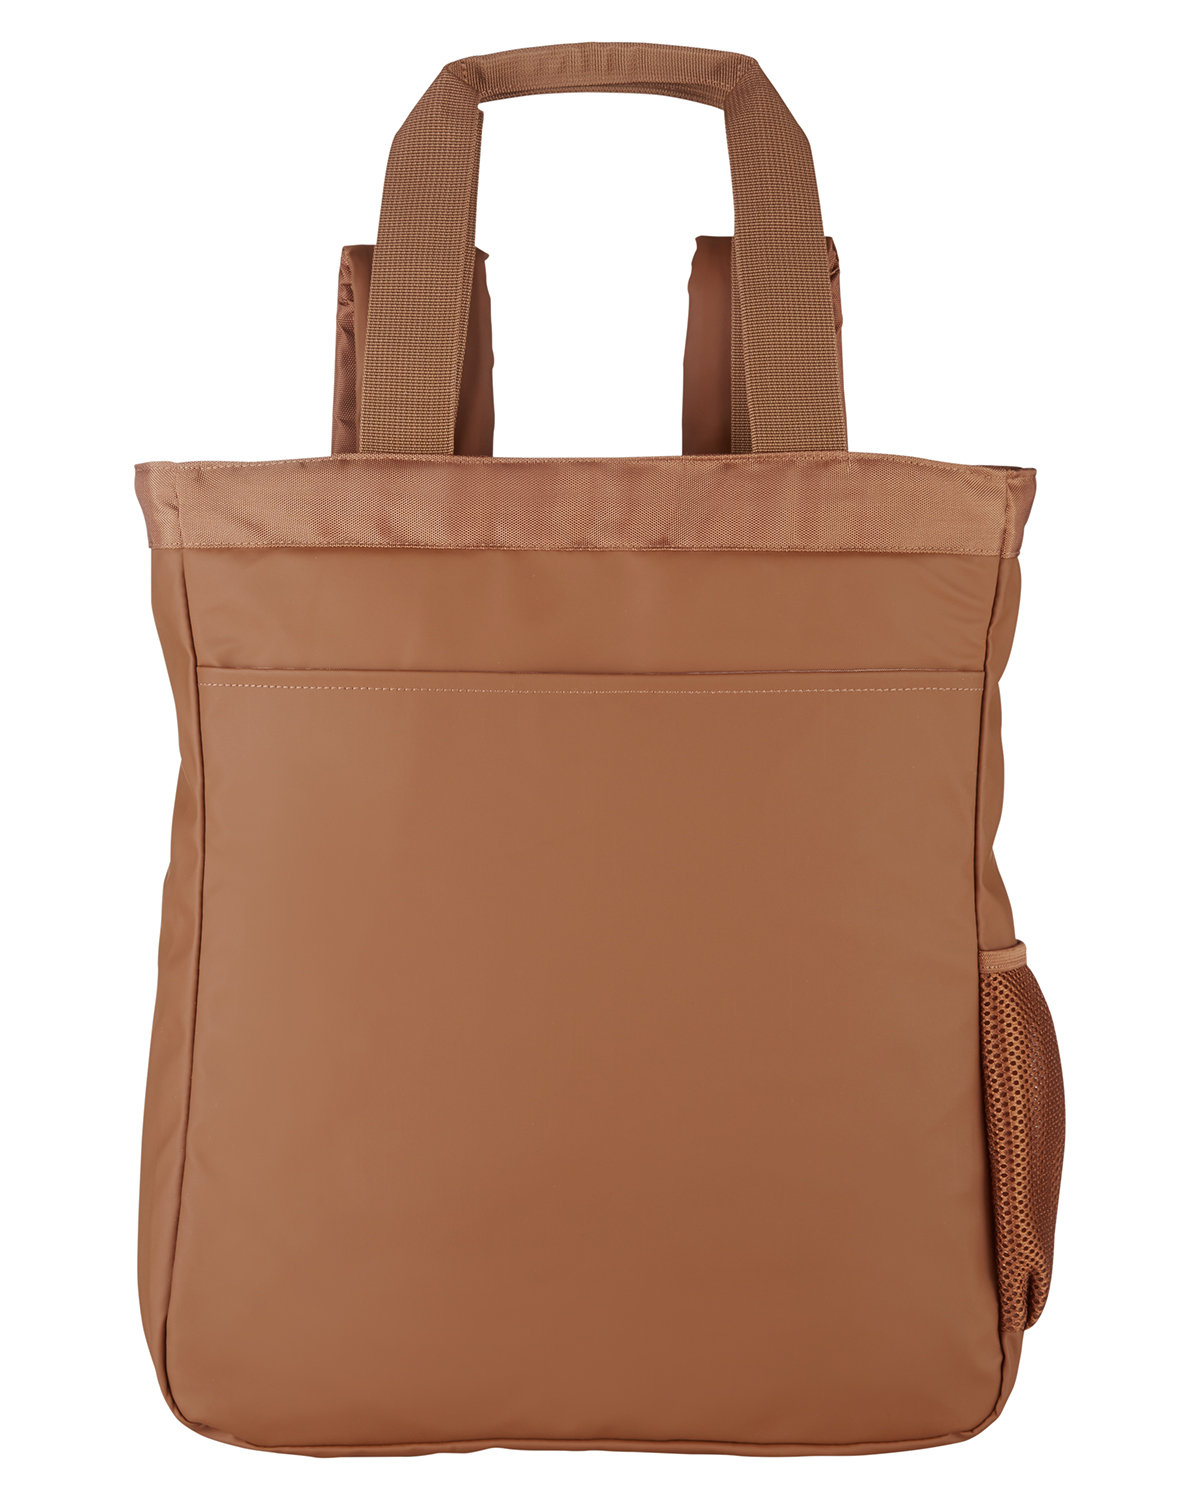 North End Convertible Backpack Tote TEAK 